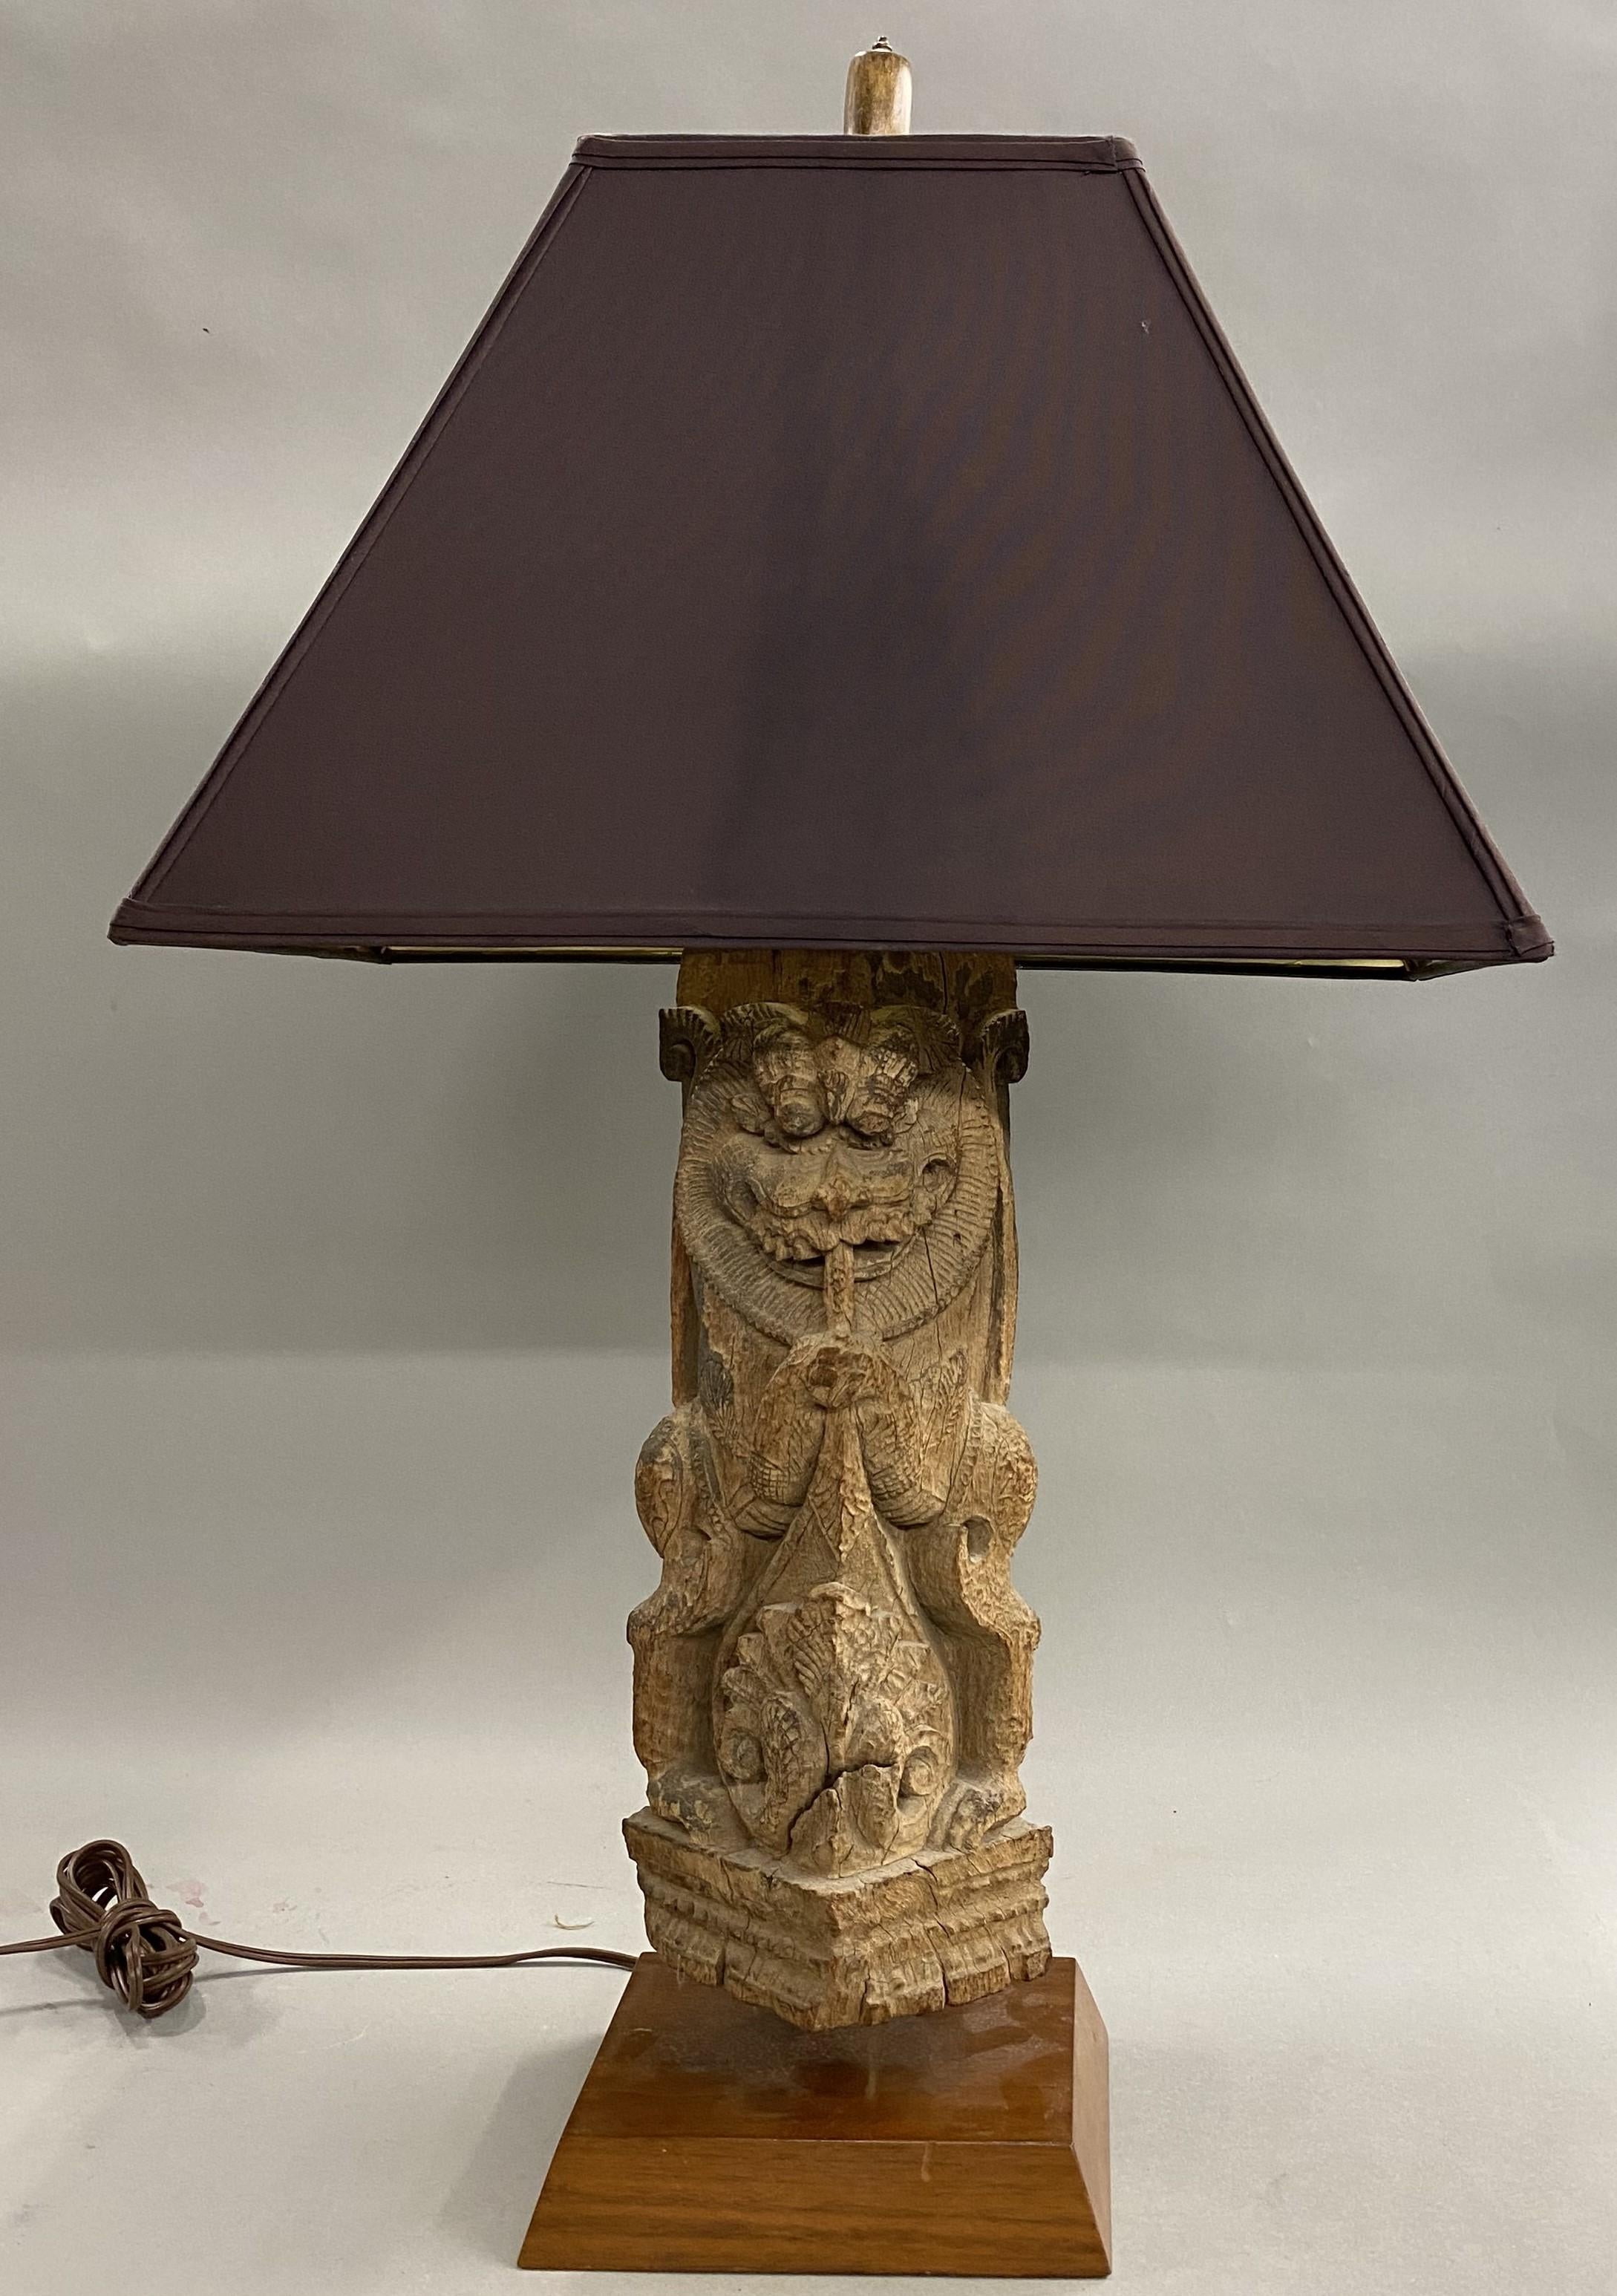 A decorative 19th century Asian carved wooden architectural fragment featuring a horned dragon-like figure, converted to a table lamp with maroon rectangular shade. The lamp is in good working condition, with minimal imperfections and light wear